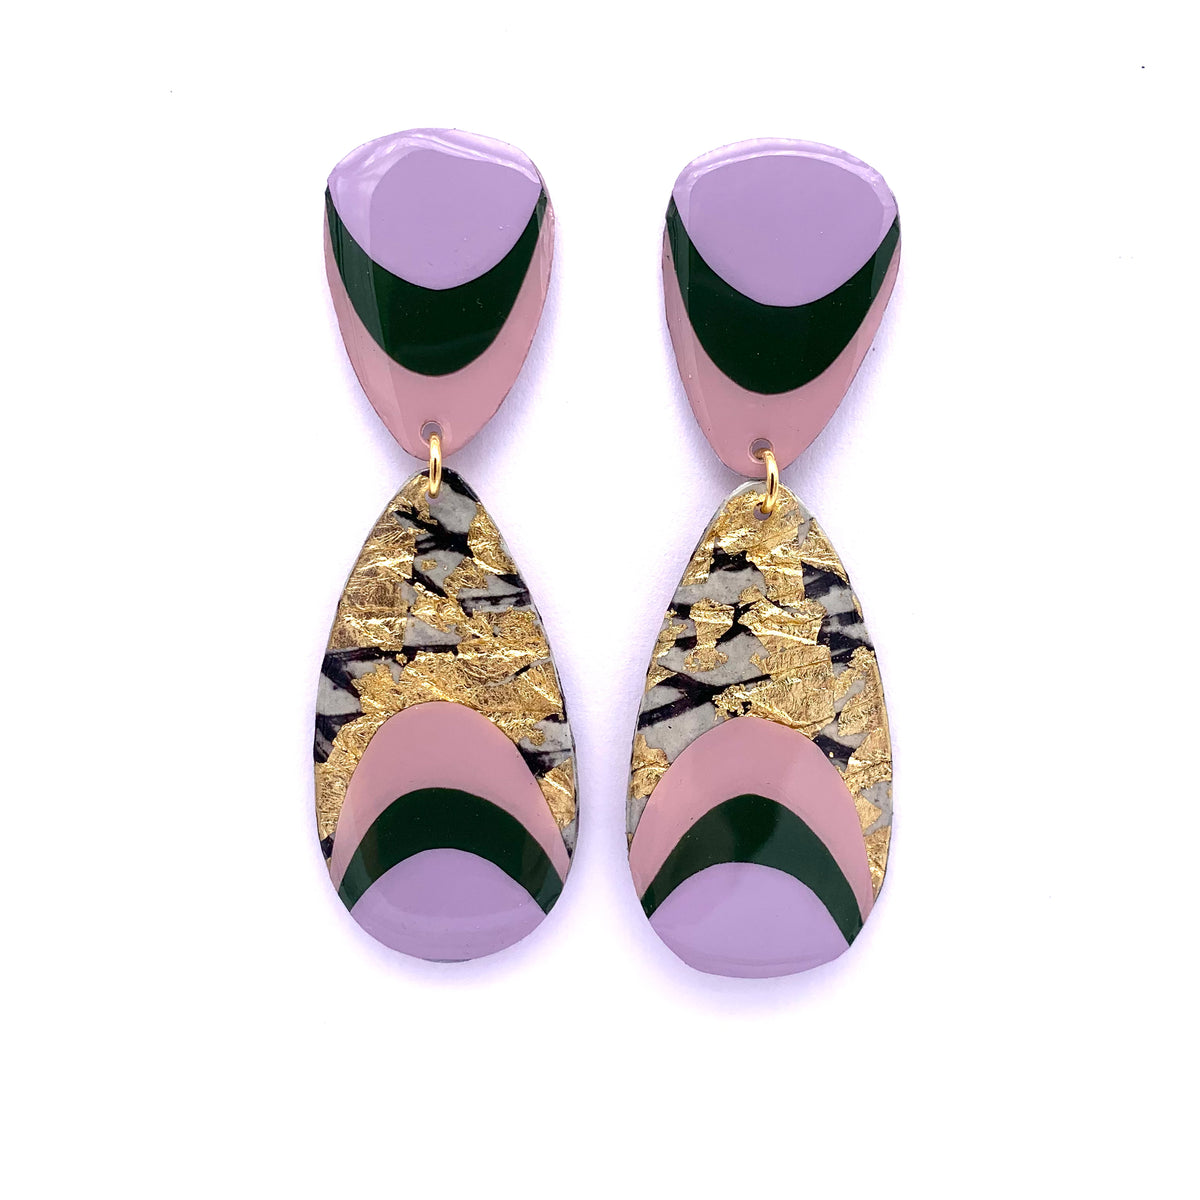 M’anam sgraffito earrings in gold/black/olive/lilac/pale pink